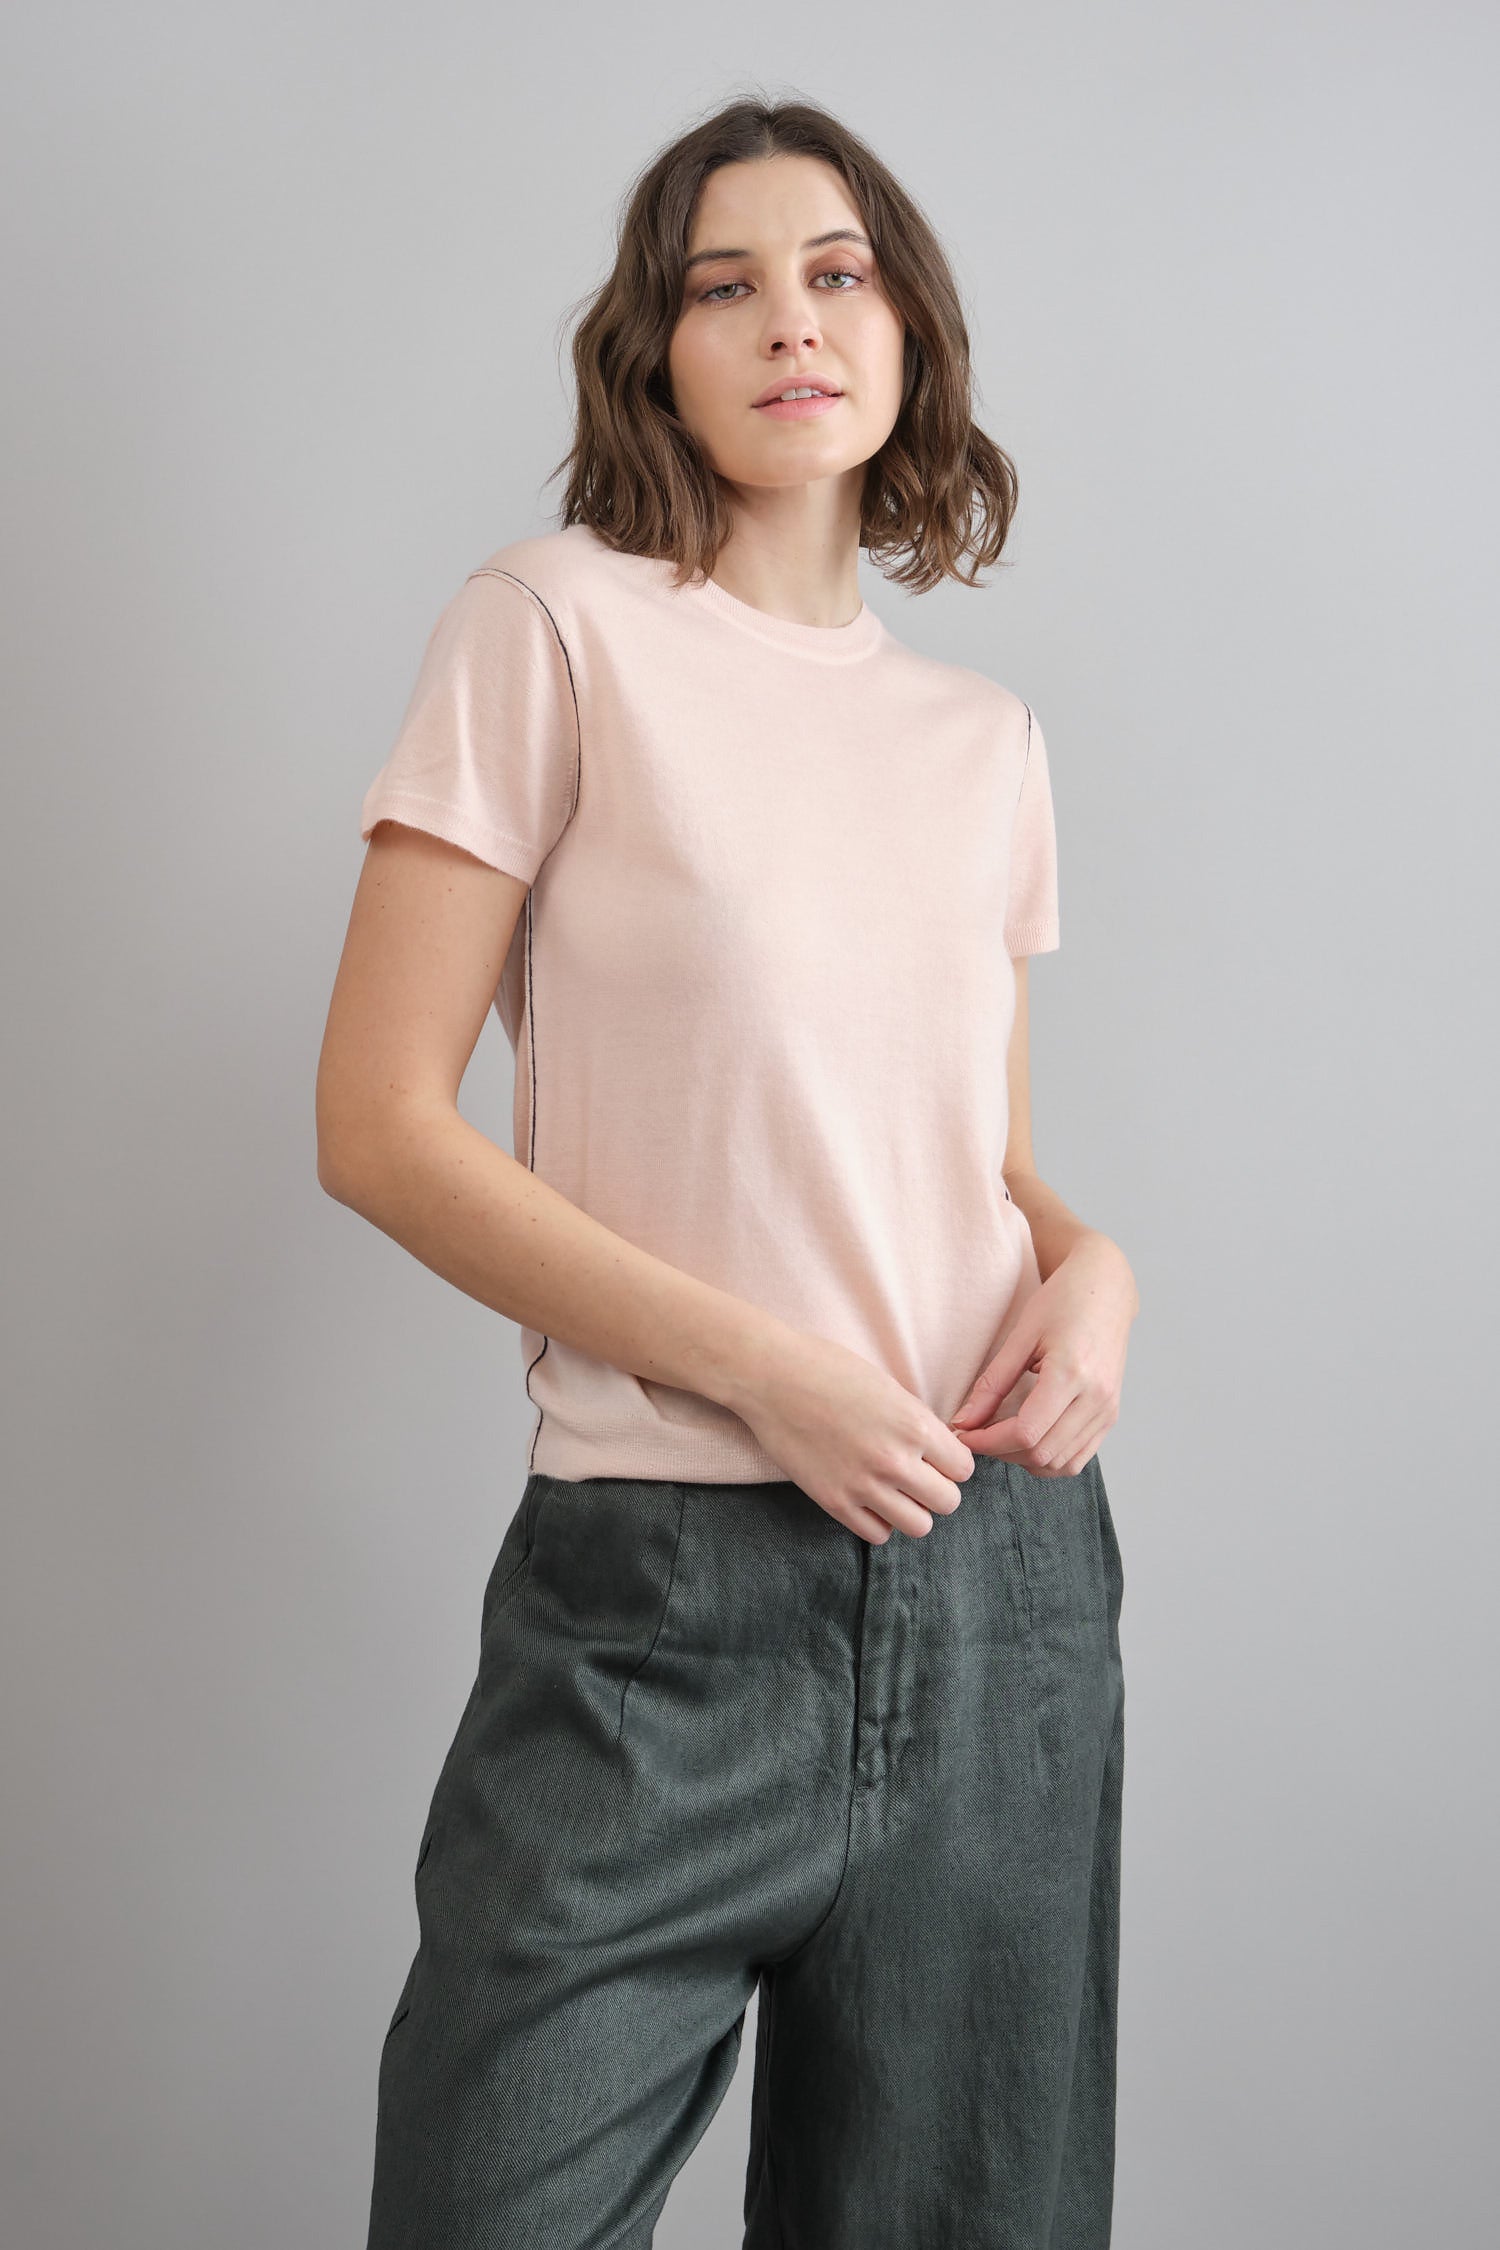 Crew Tee in Pale Apricot